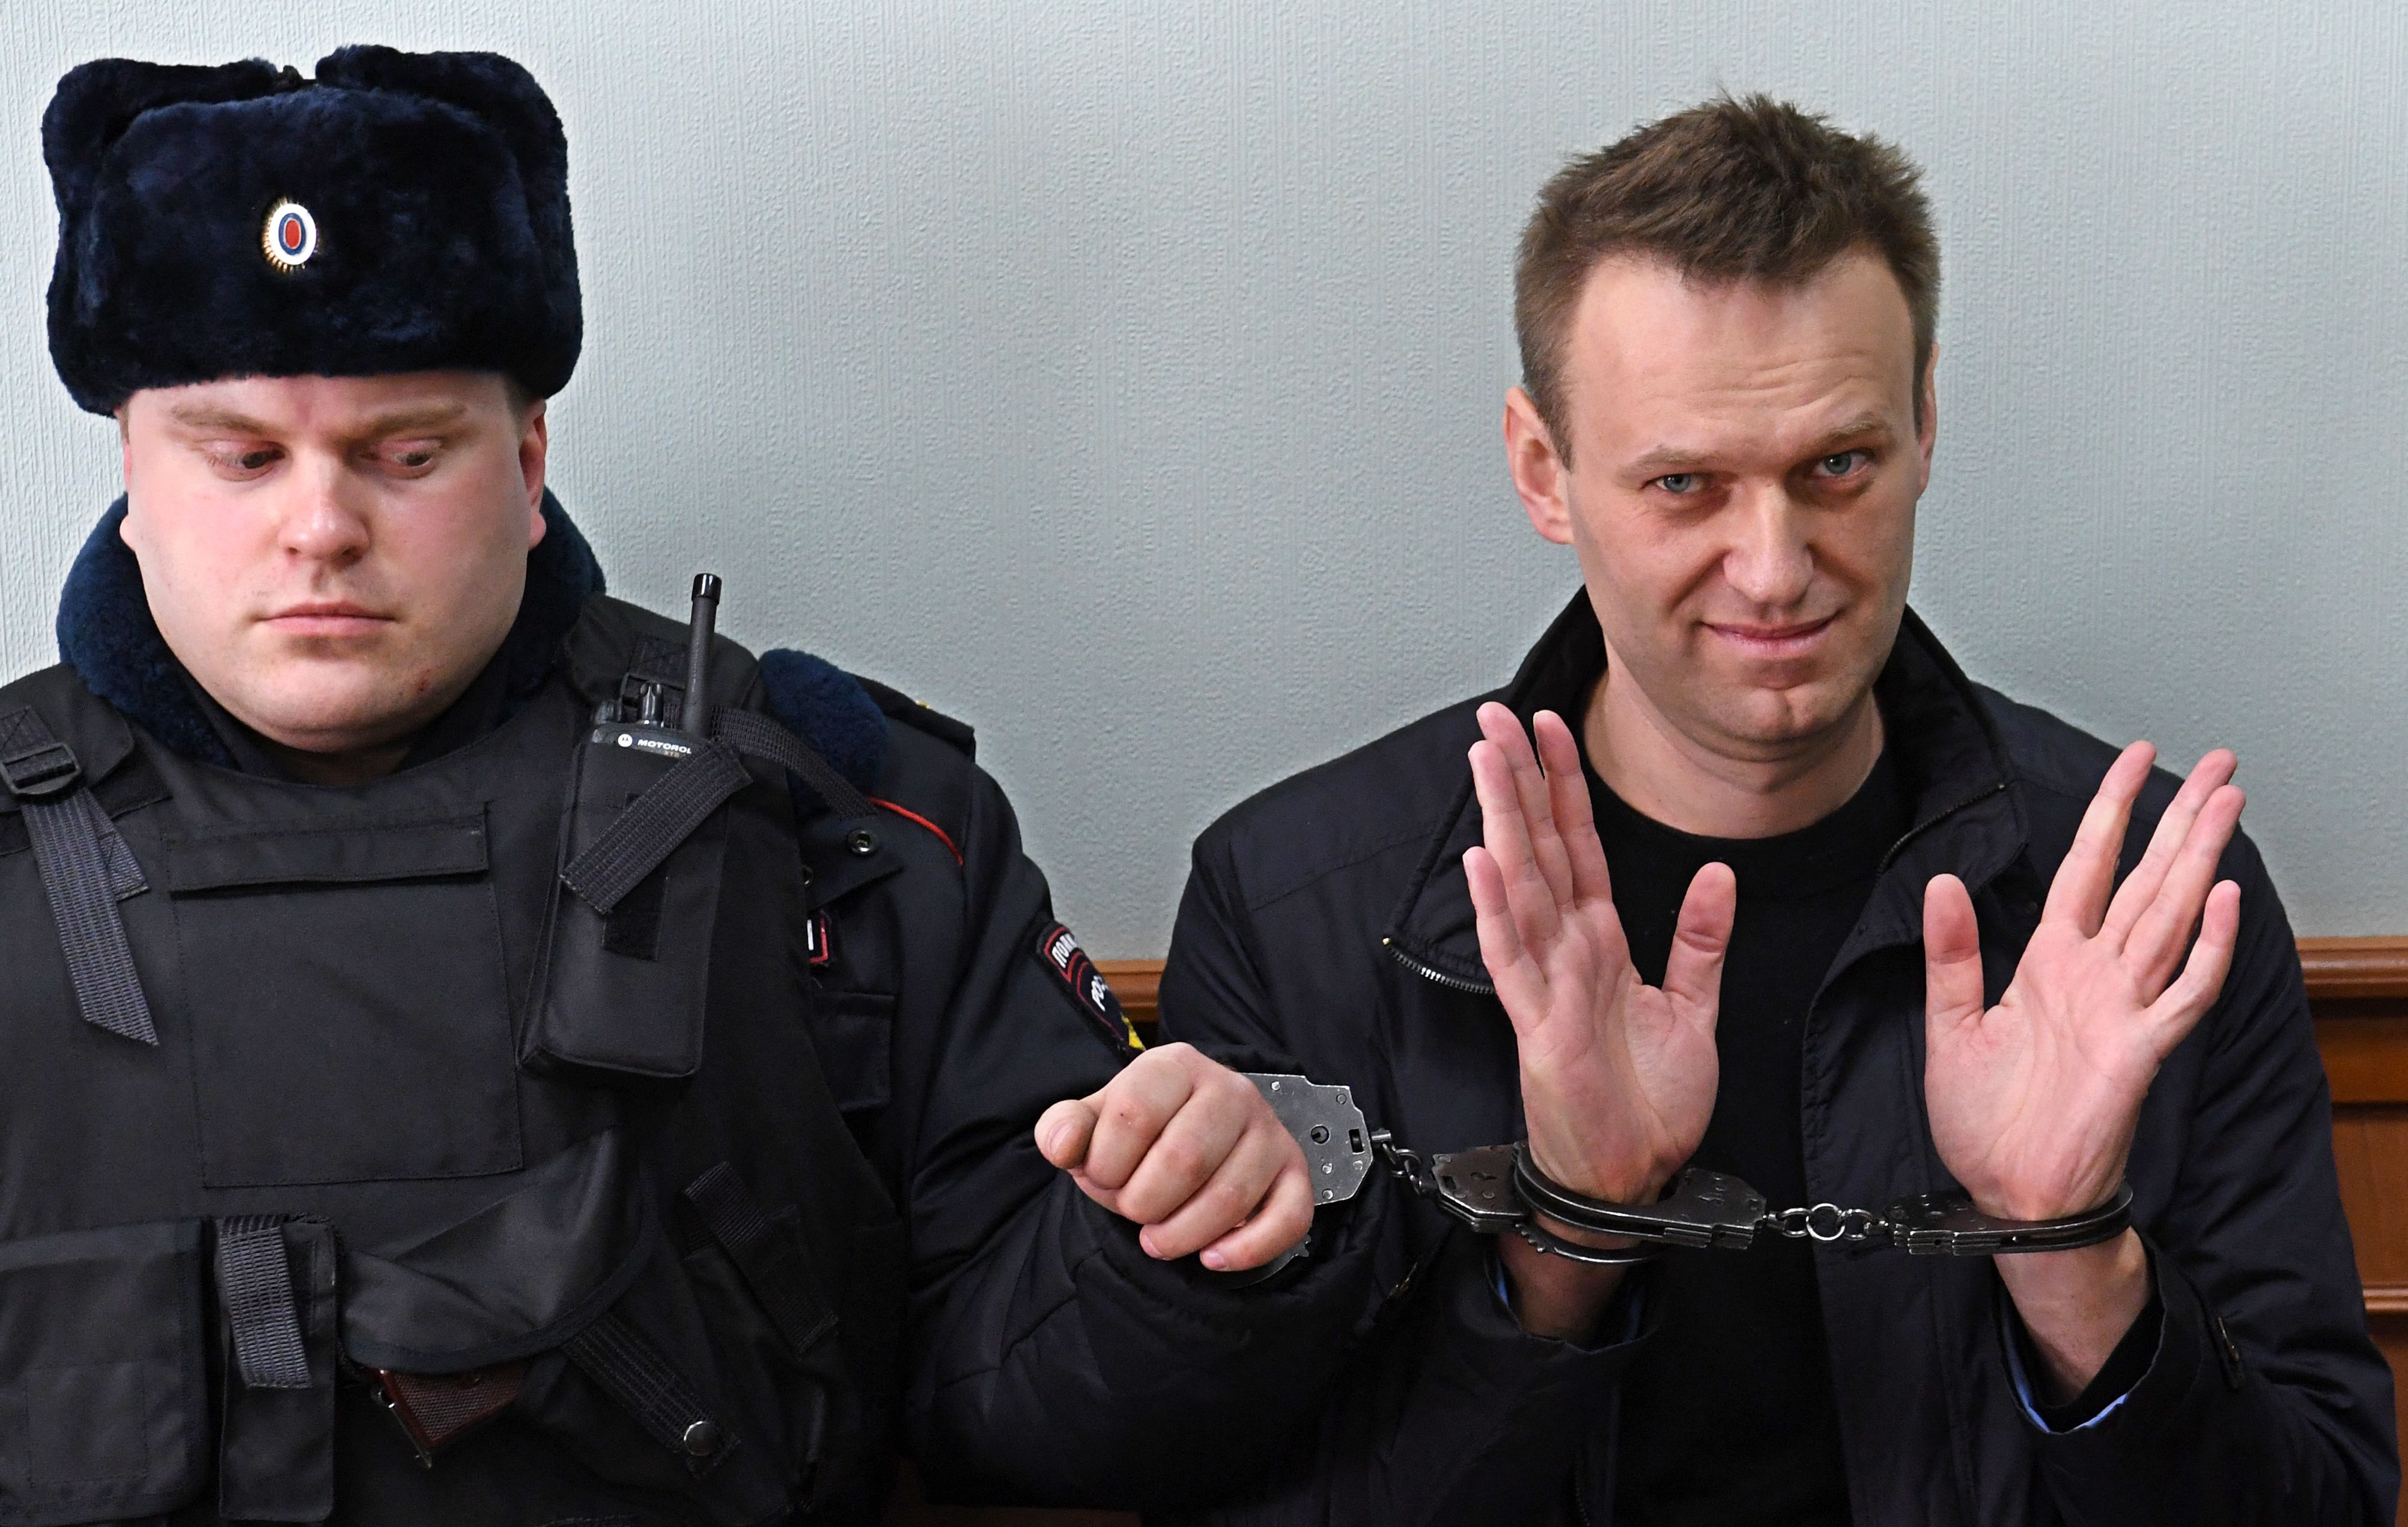 Navalny gestures during an appeal hearing at a court in Moscow in March 2017. He was sentenced to 15 days behind bars for resisting police during the opposition rally.